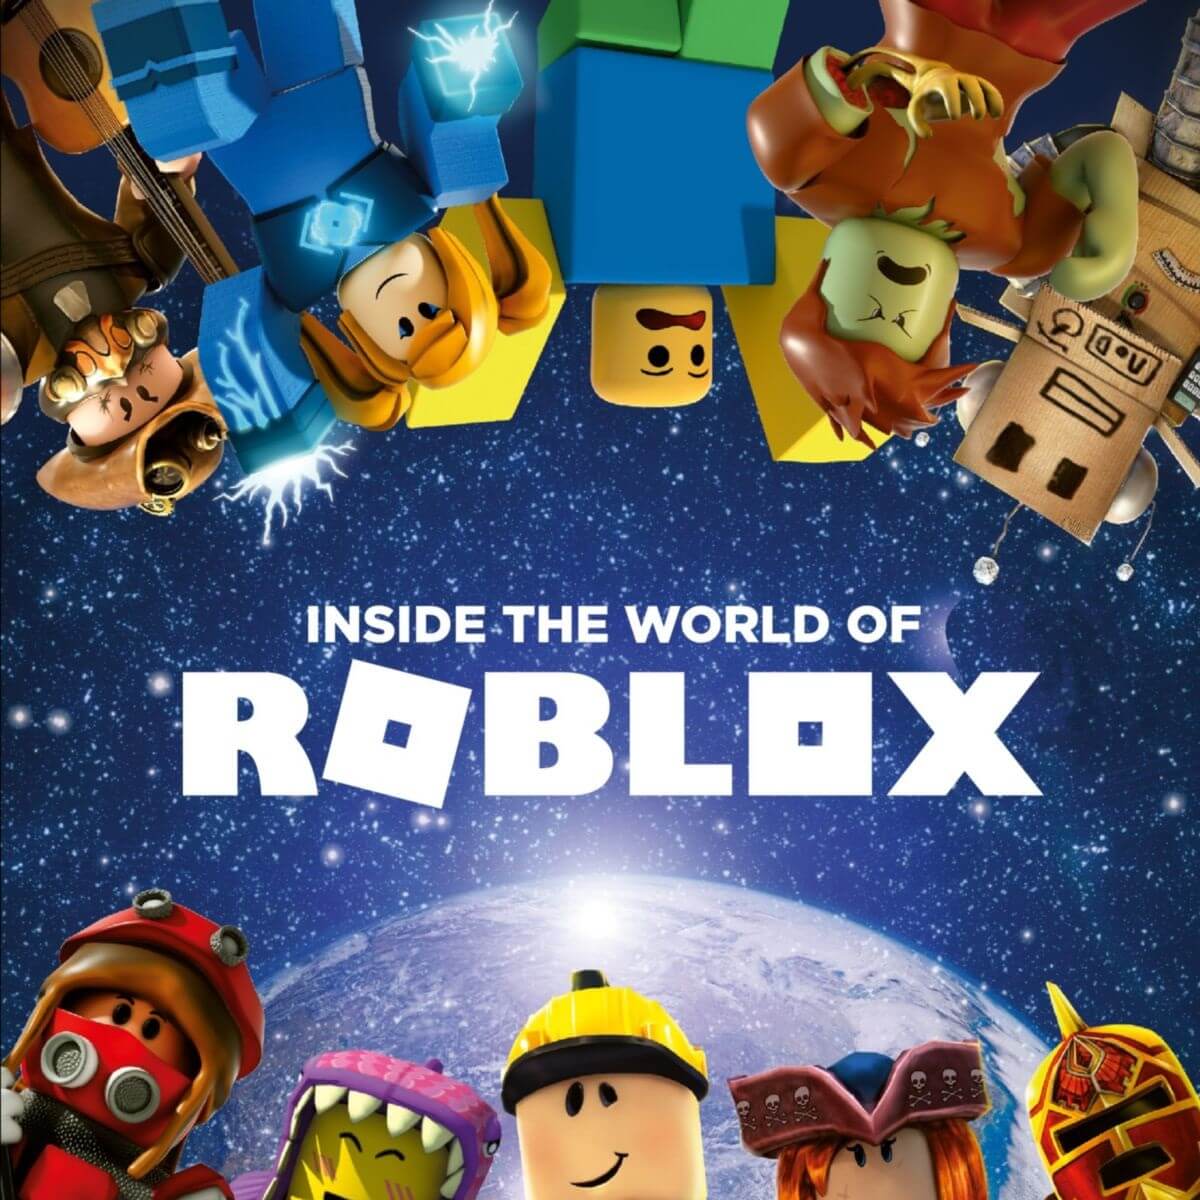 Sorry This Game Failed To Fetch Join Script Roblox Error Solved